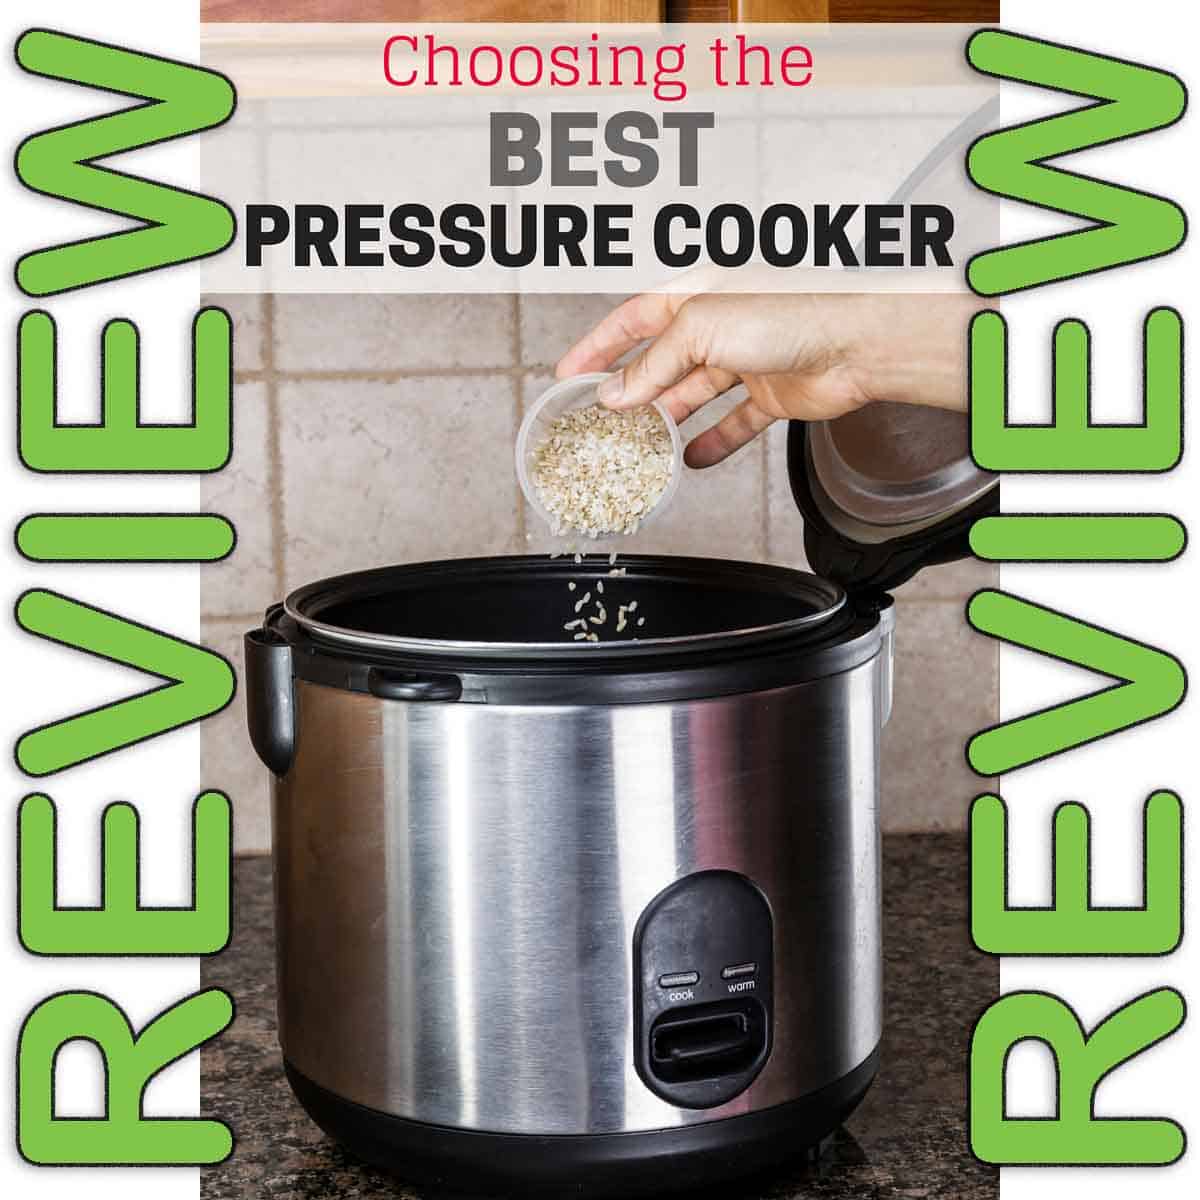 Best Electric Pressure Cookers Reviewed